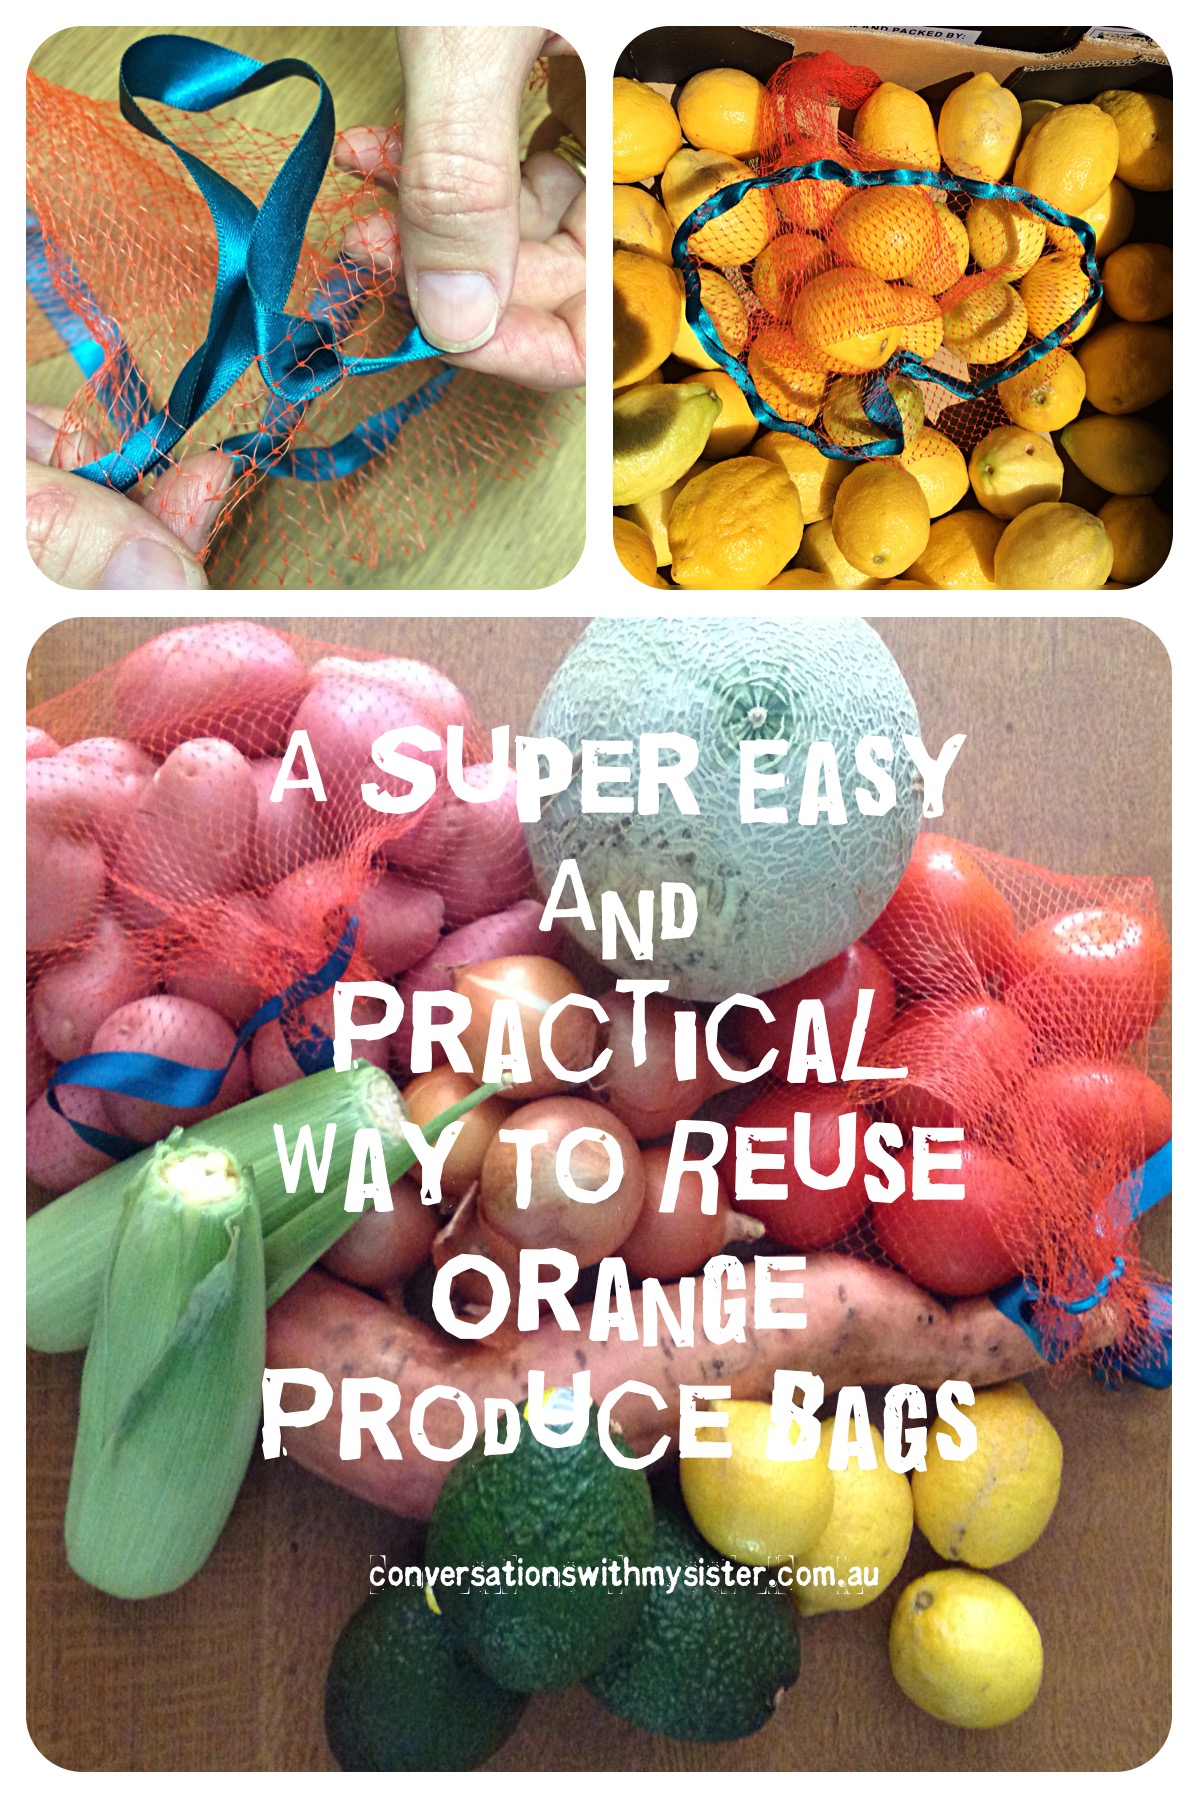 It is amazing what you discover when looking for practical ways of reusing or recycling perfectly good items rather than just sending them to landfill. This is a simple #DIY idea and actually, with just a quick modification, these bags can continue doing exactly what they were designed for - carrying produce!